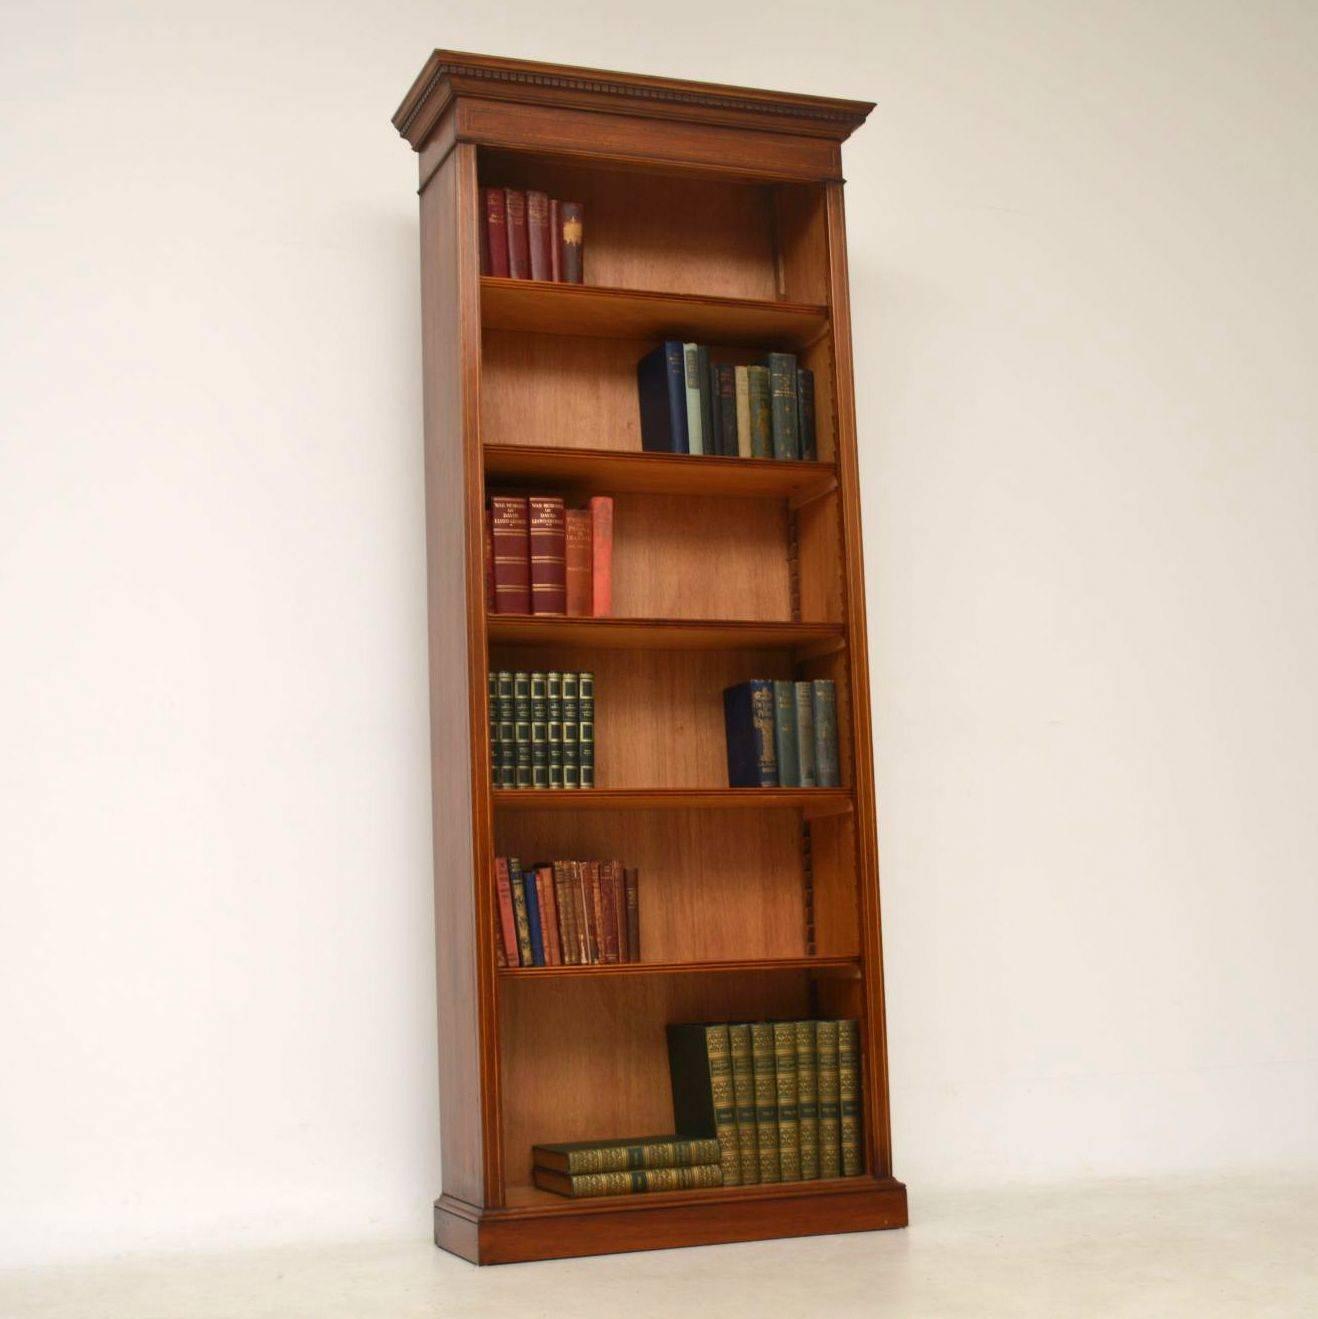 Tall antique Sheraton style open bookcase in mahogany with satinwood inlays. It has five shelves with reeded fronts that are all adjustable on sharks teeth supports. The top cornice has dental mouldings below and this bookcase sits on a plinth base.